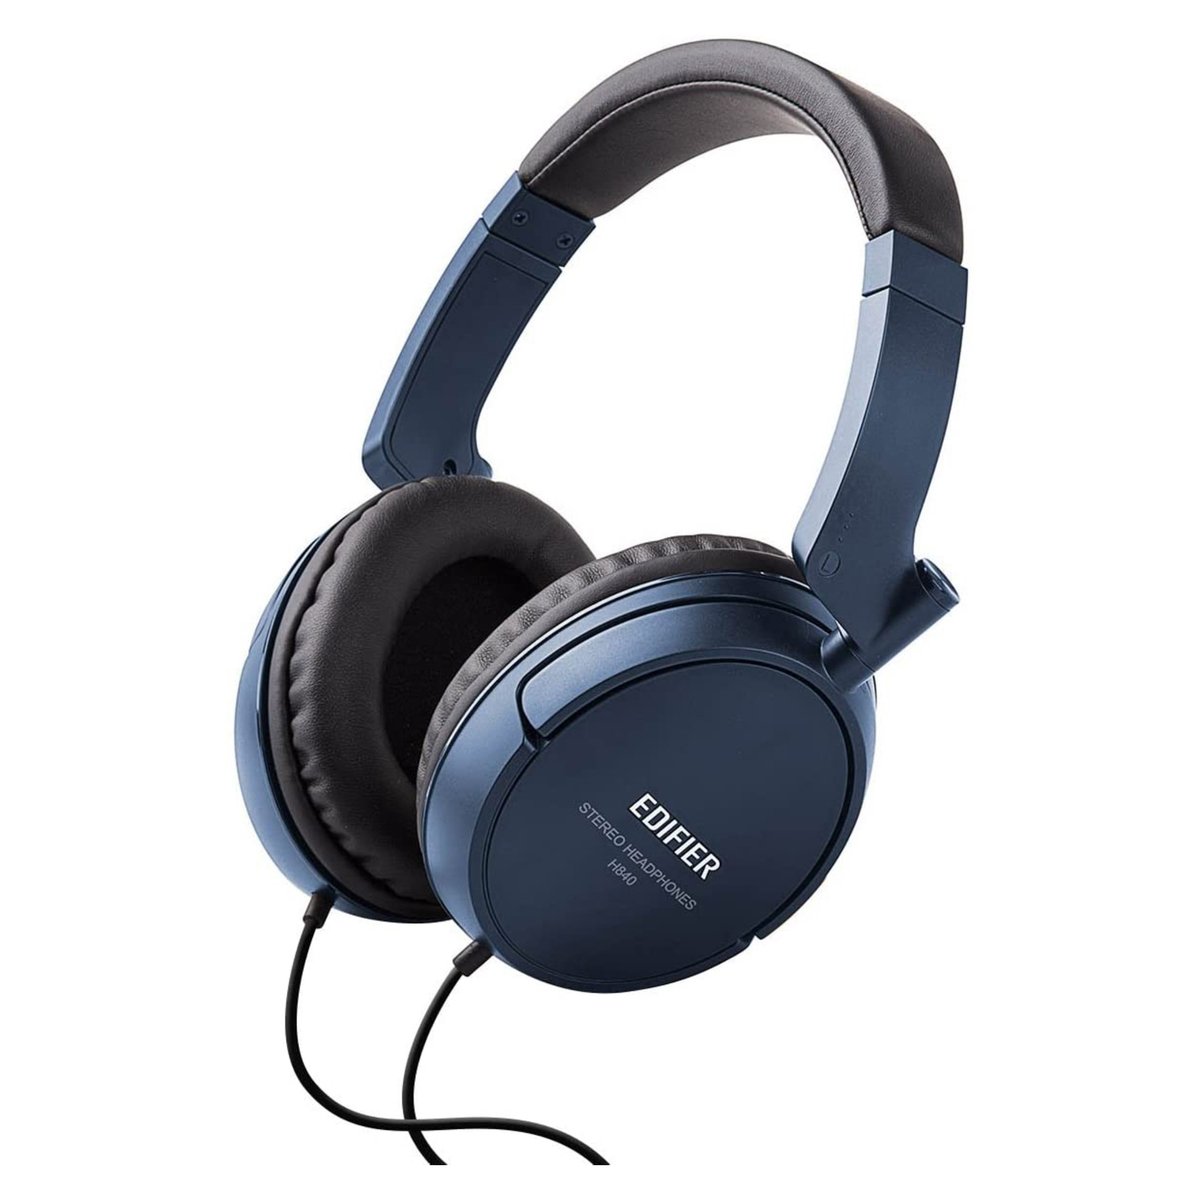 Edifier Wired Stereo Headset H840 Blue